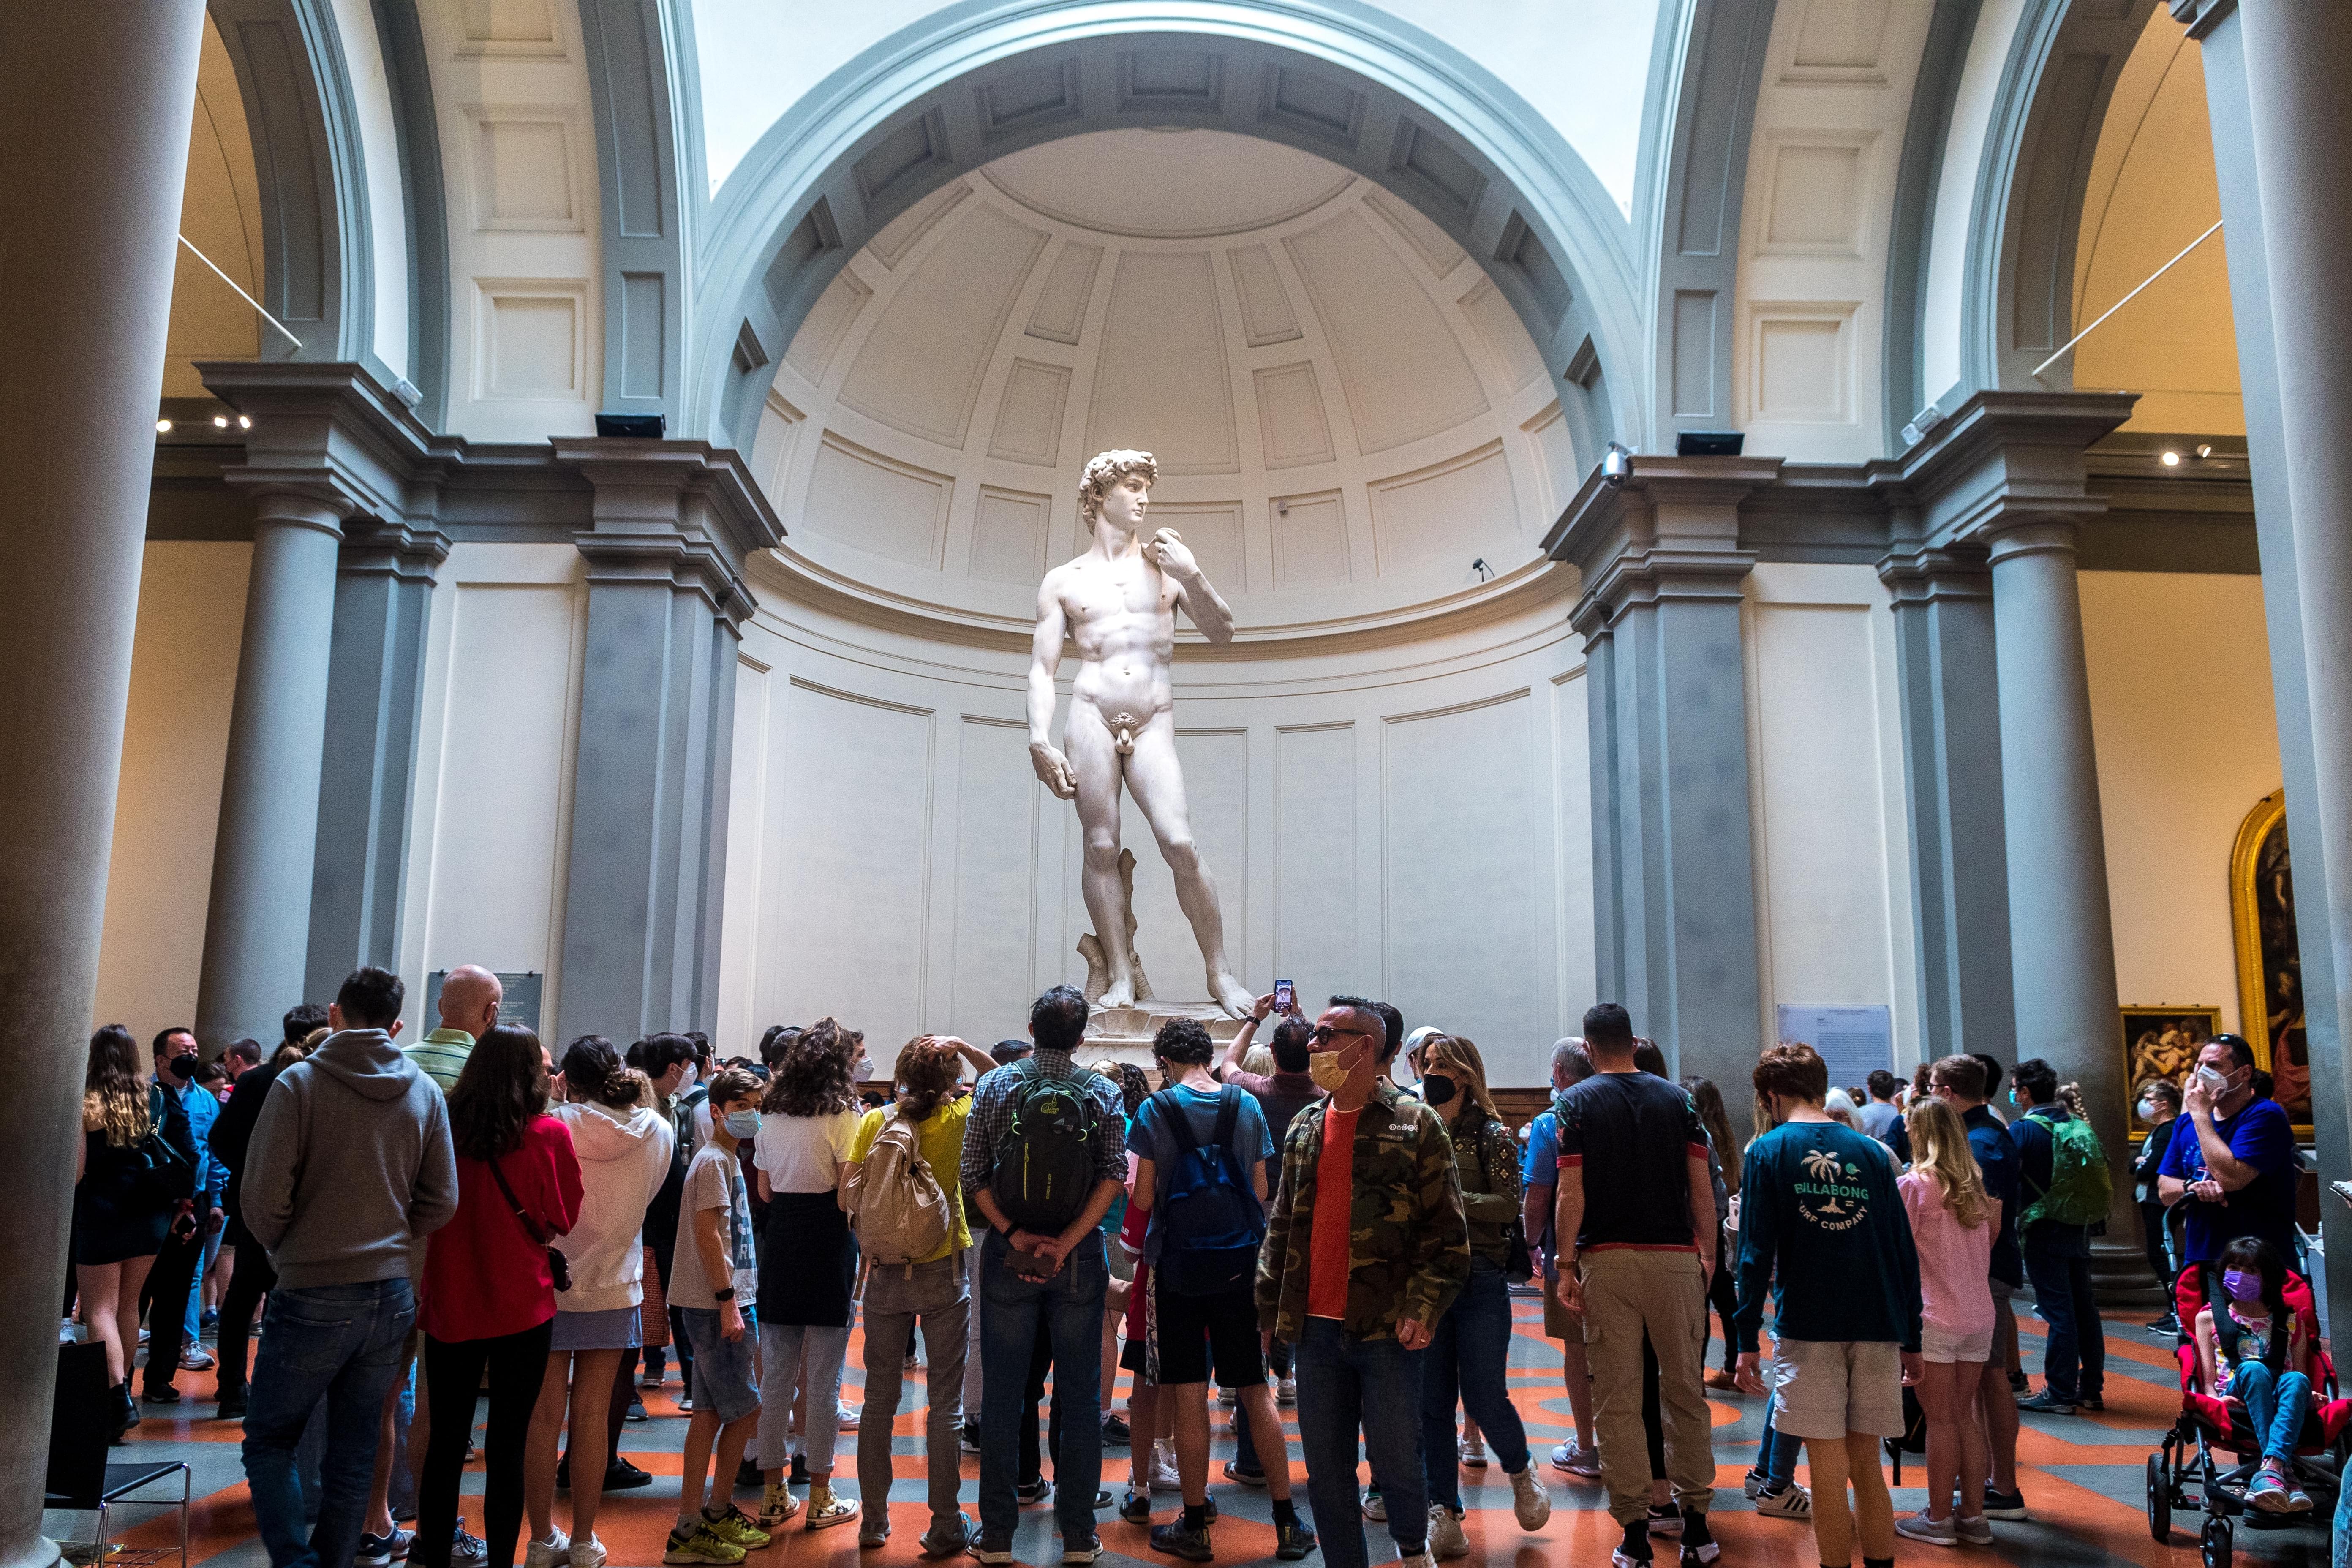 Michelangelo's David in Accademia Gallery